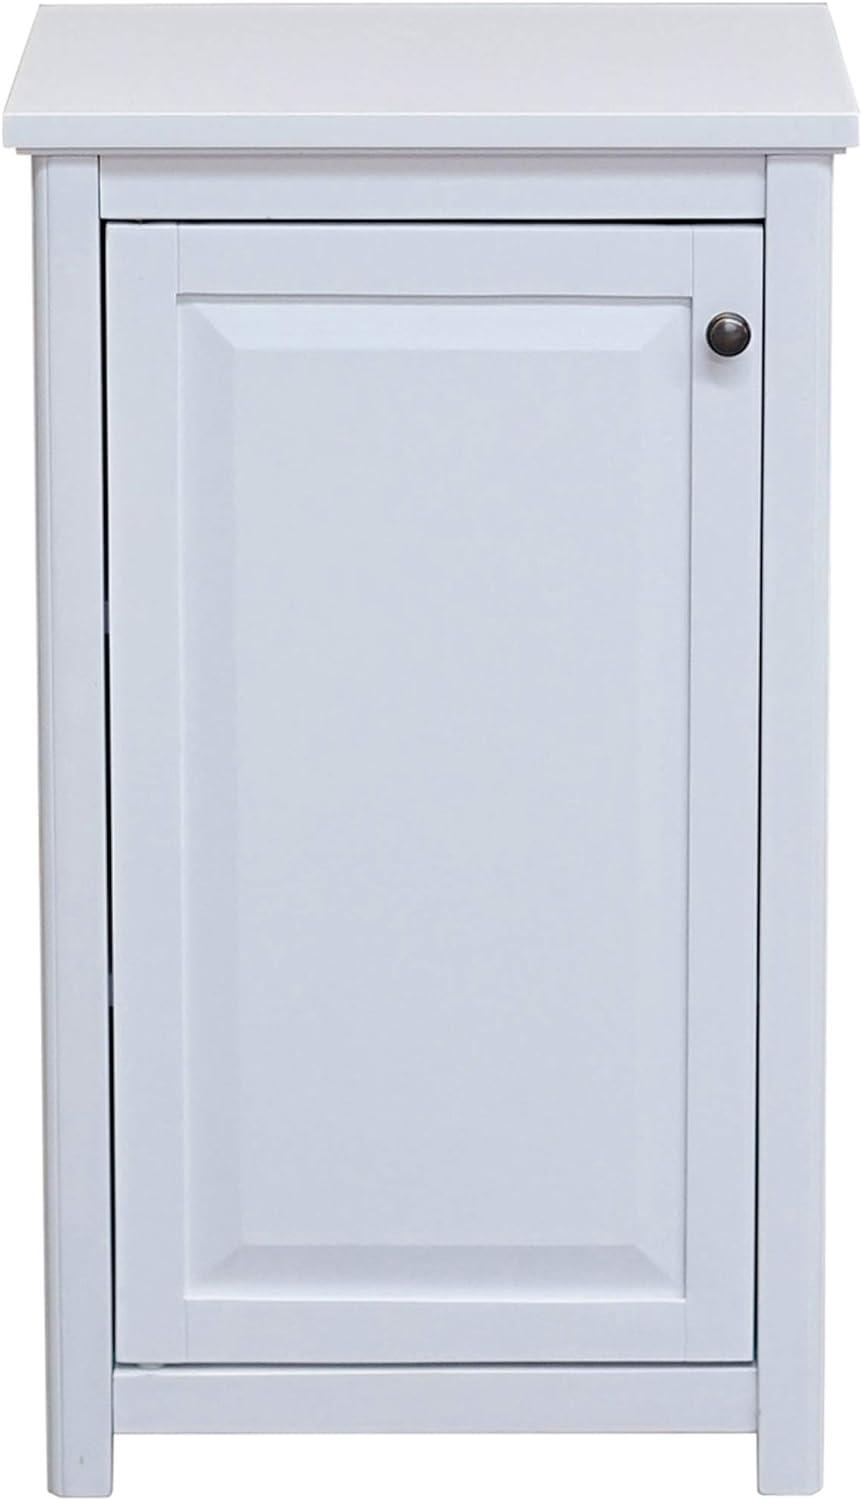 Adjustable White Wood Storage Tower with Doors